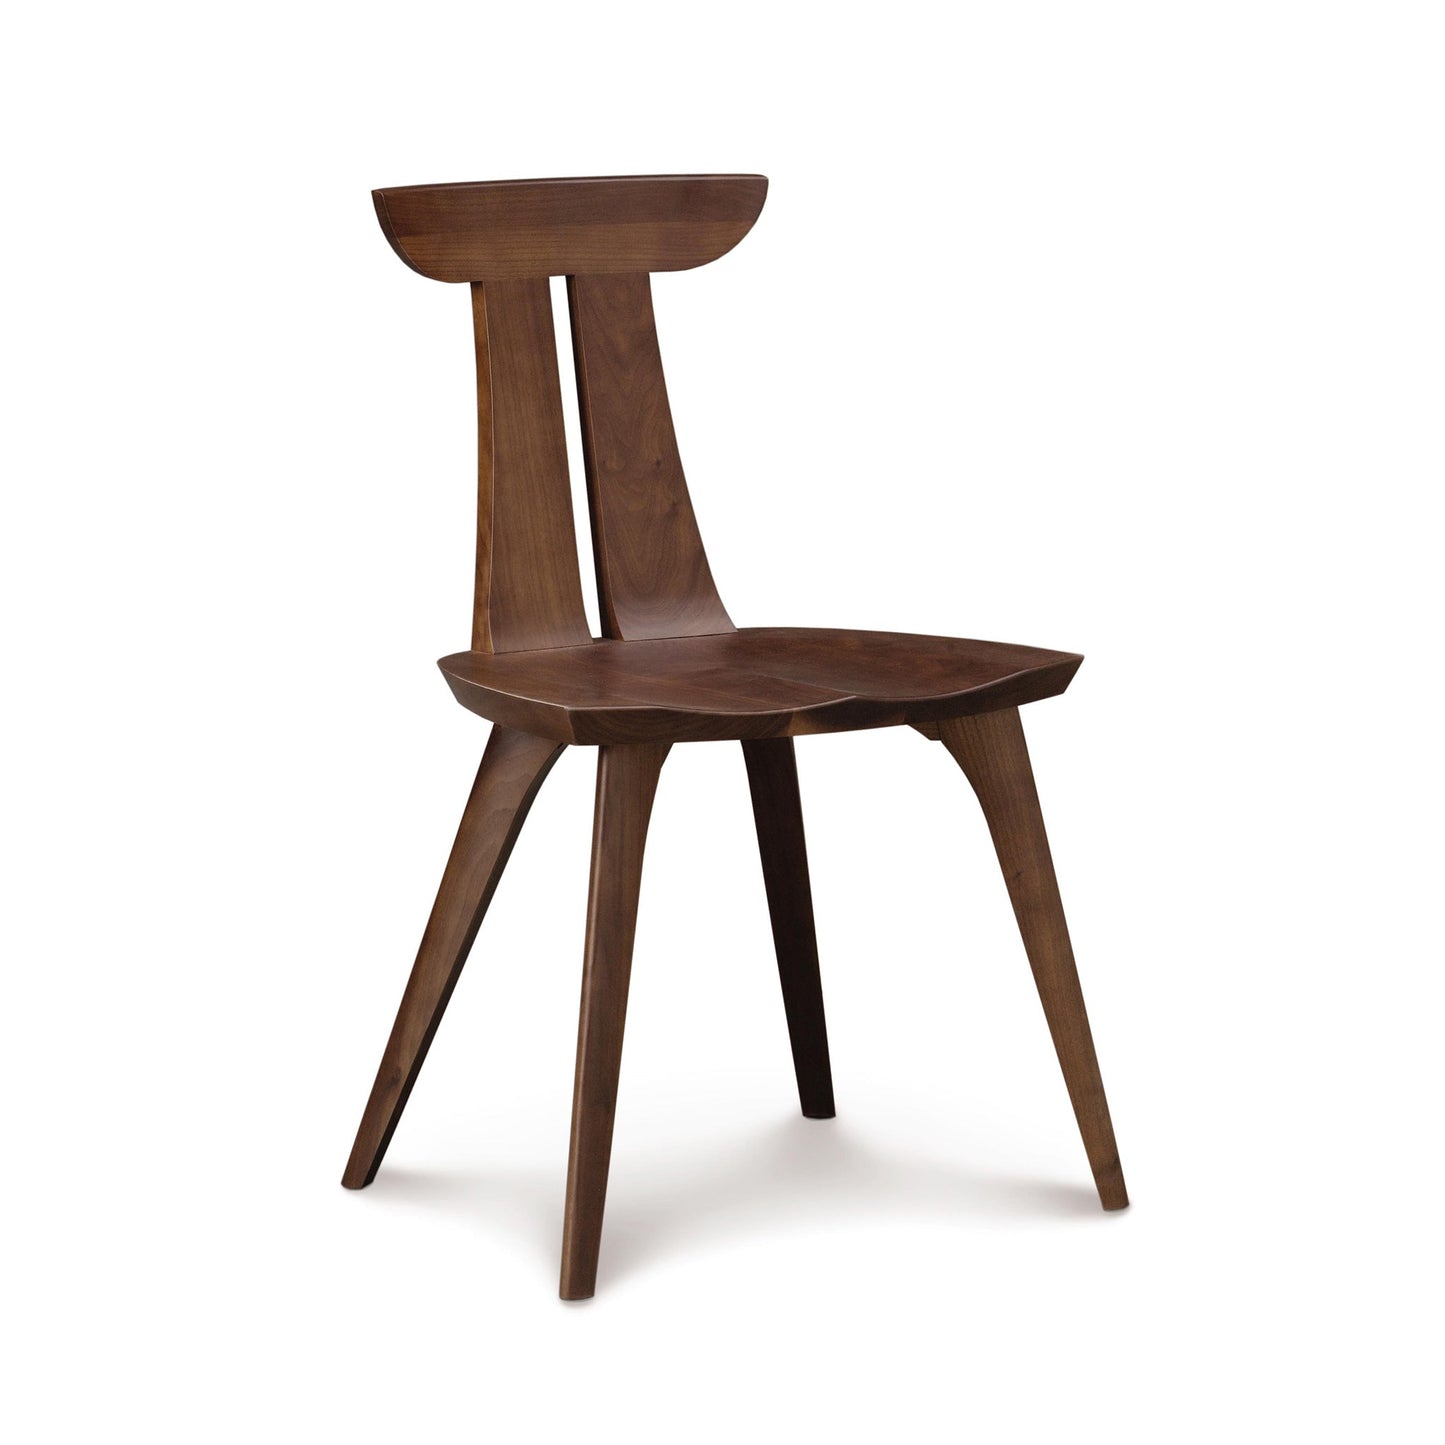 A modern dining chair with a wooden seat.